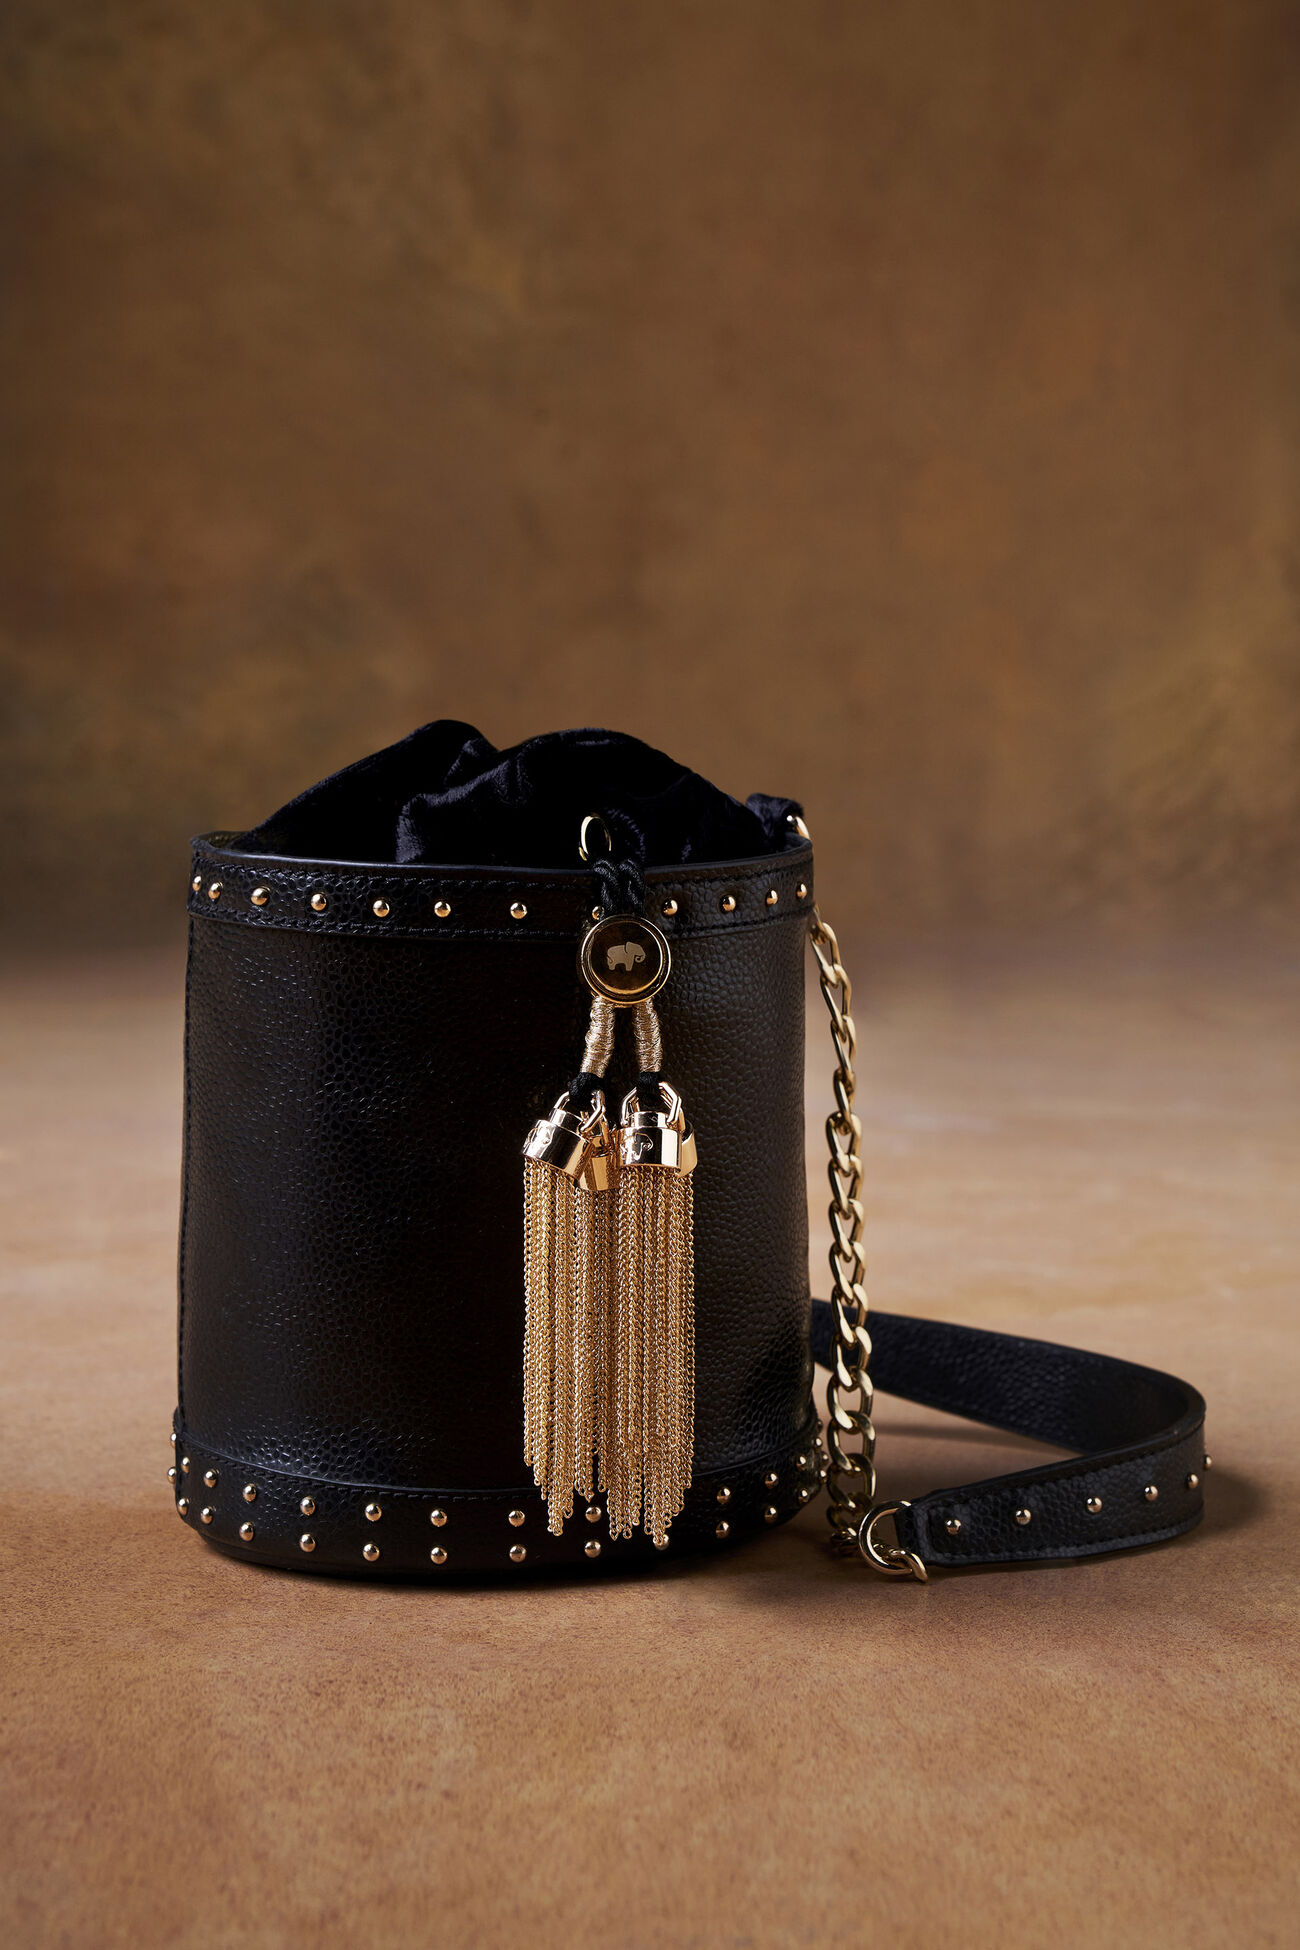 From The Wilderness Bucket Bag - Nocturnal Black, Black, image 2